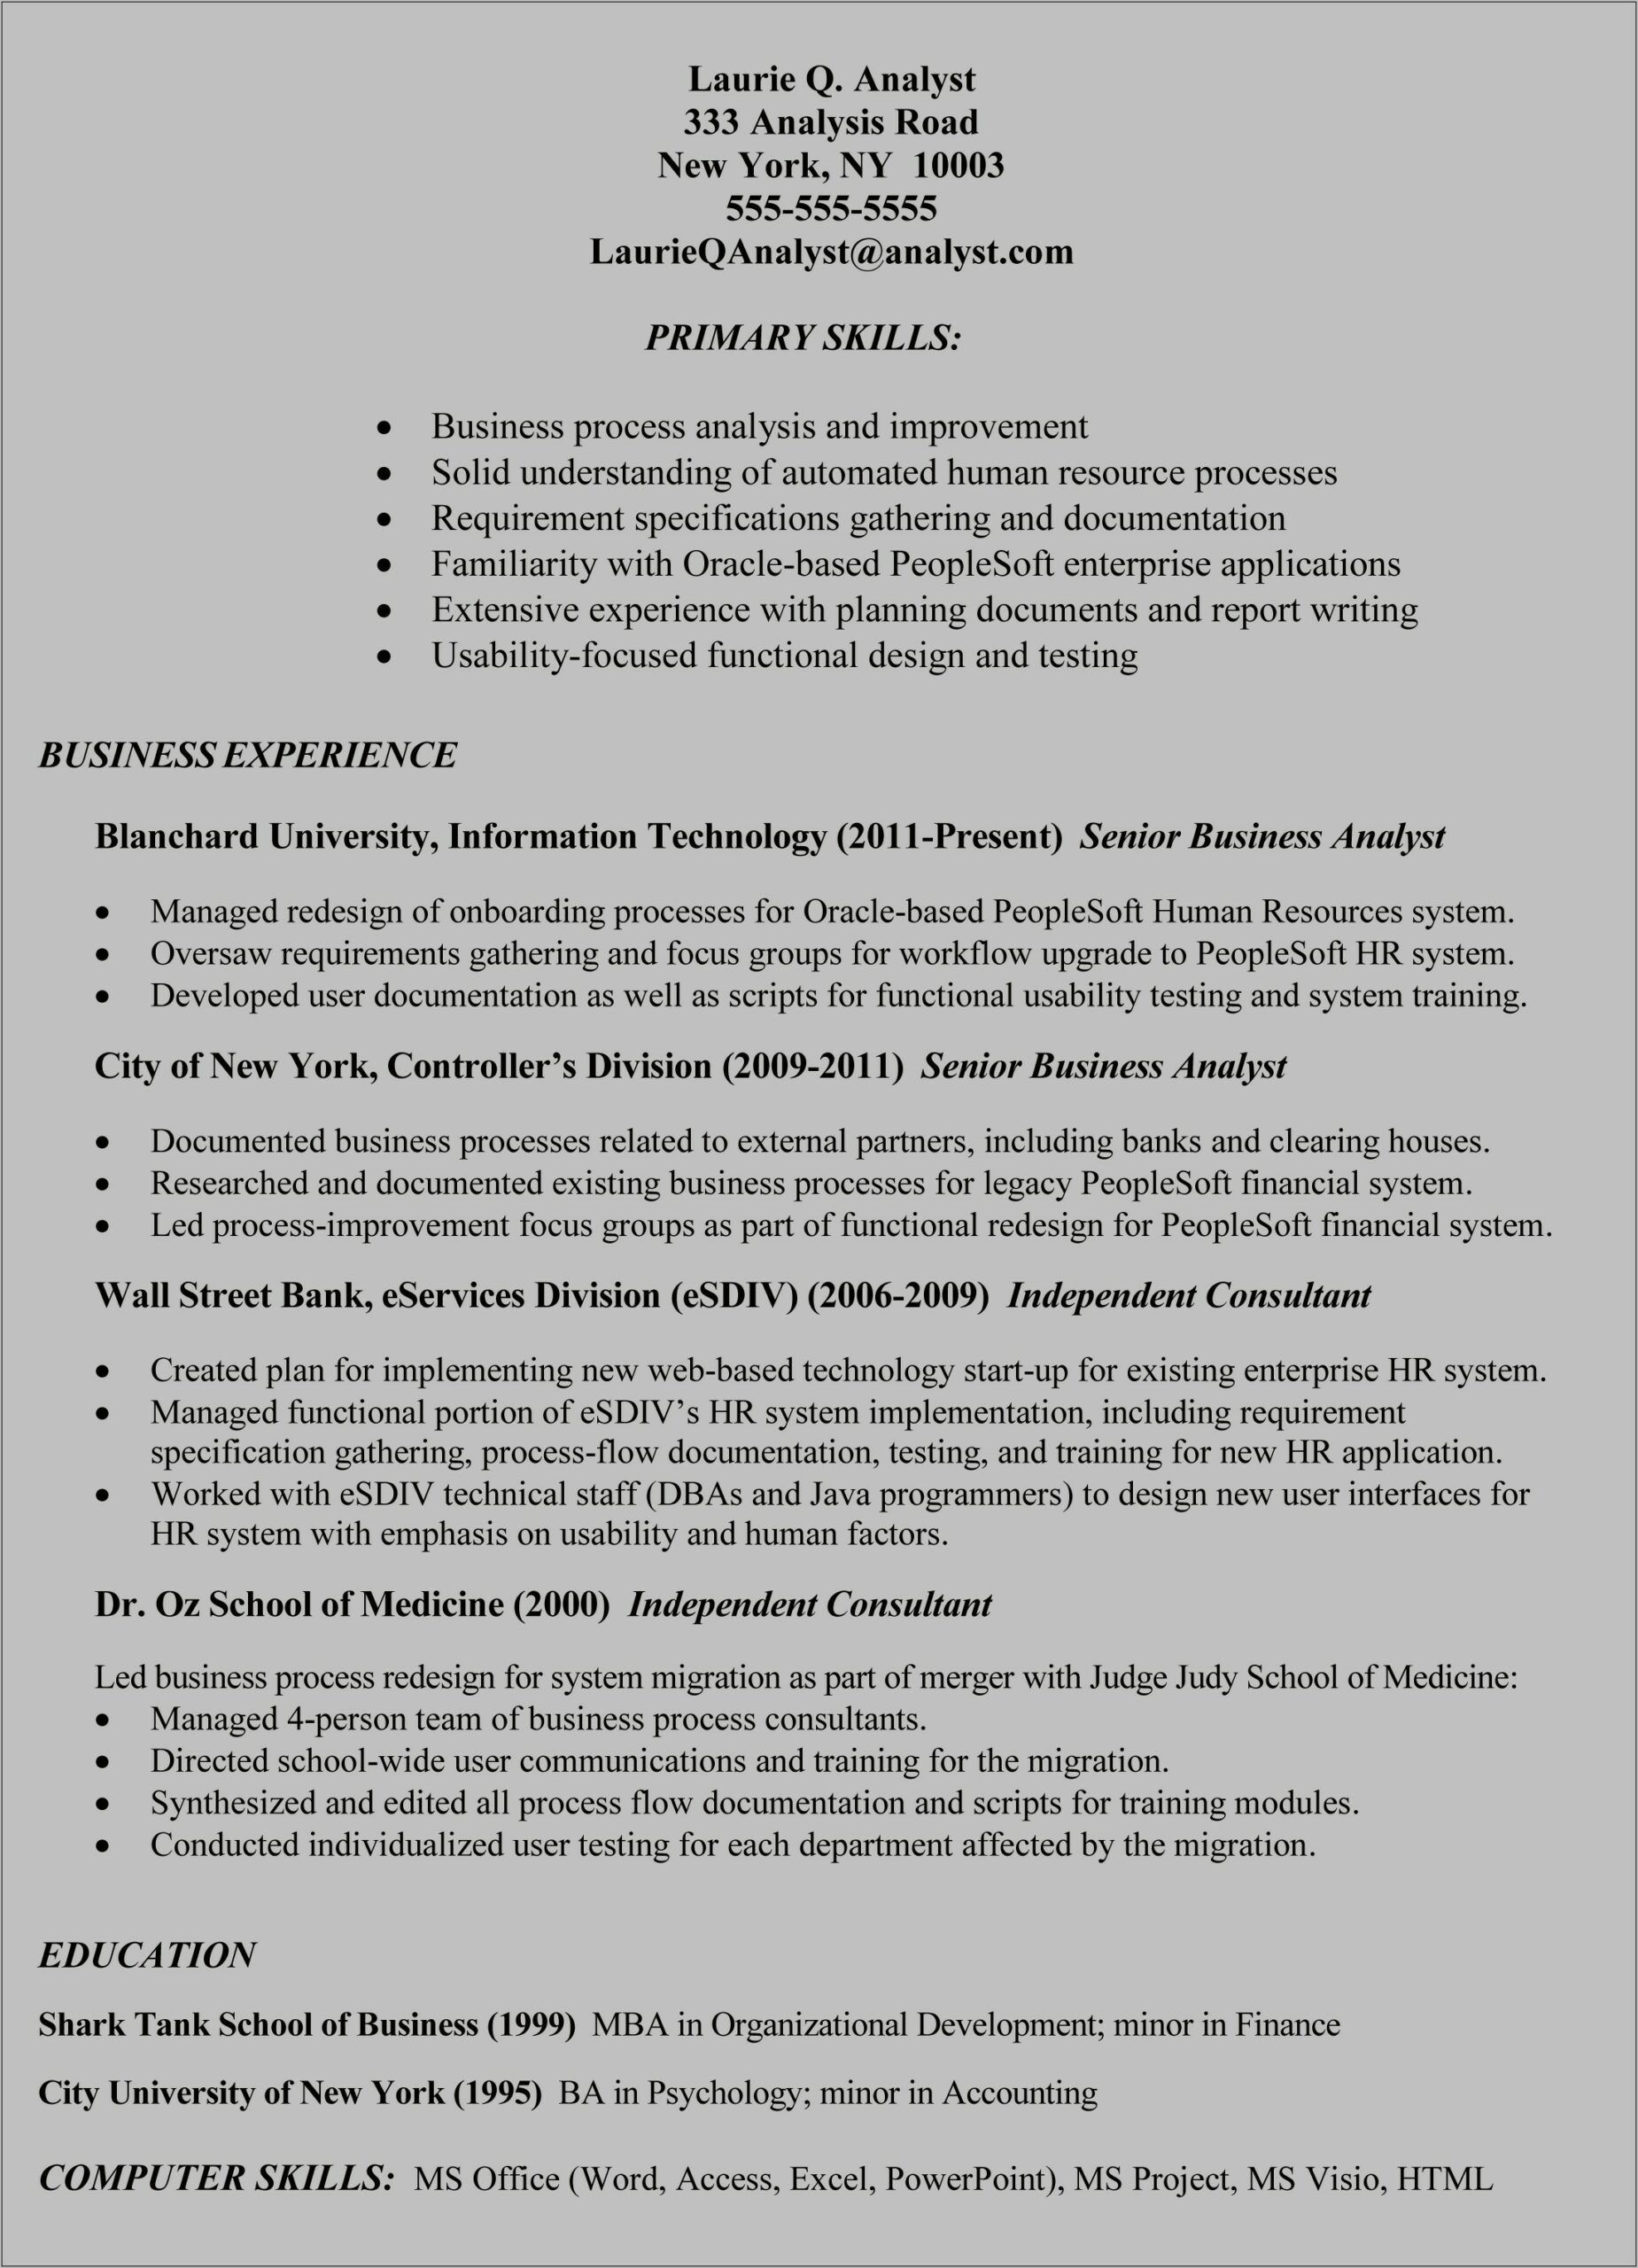 Business Systems Analyst Sample Resume Hr